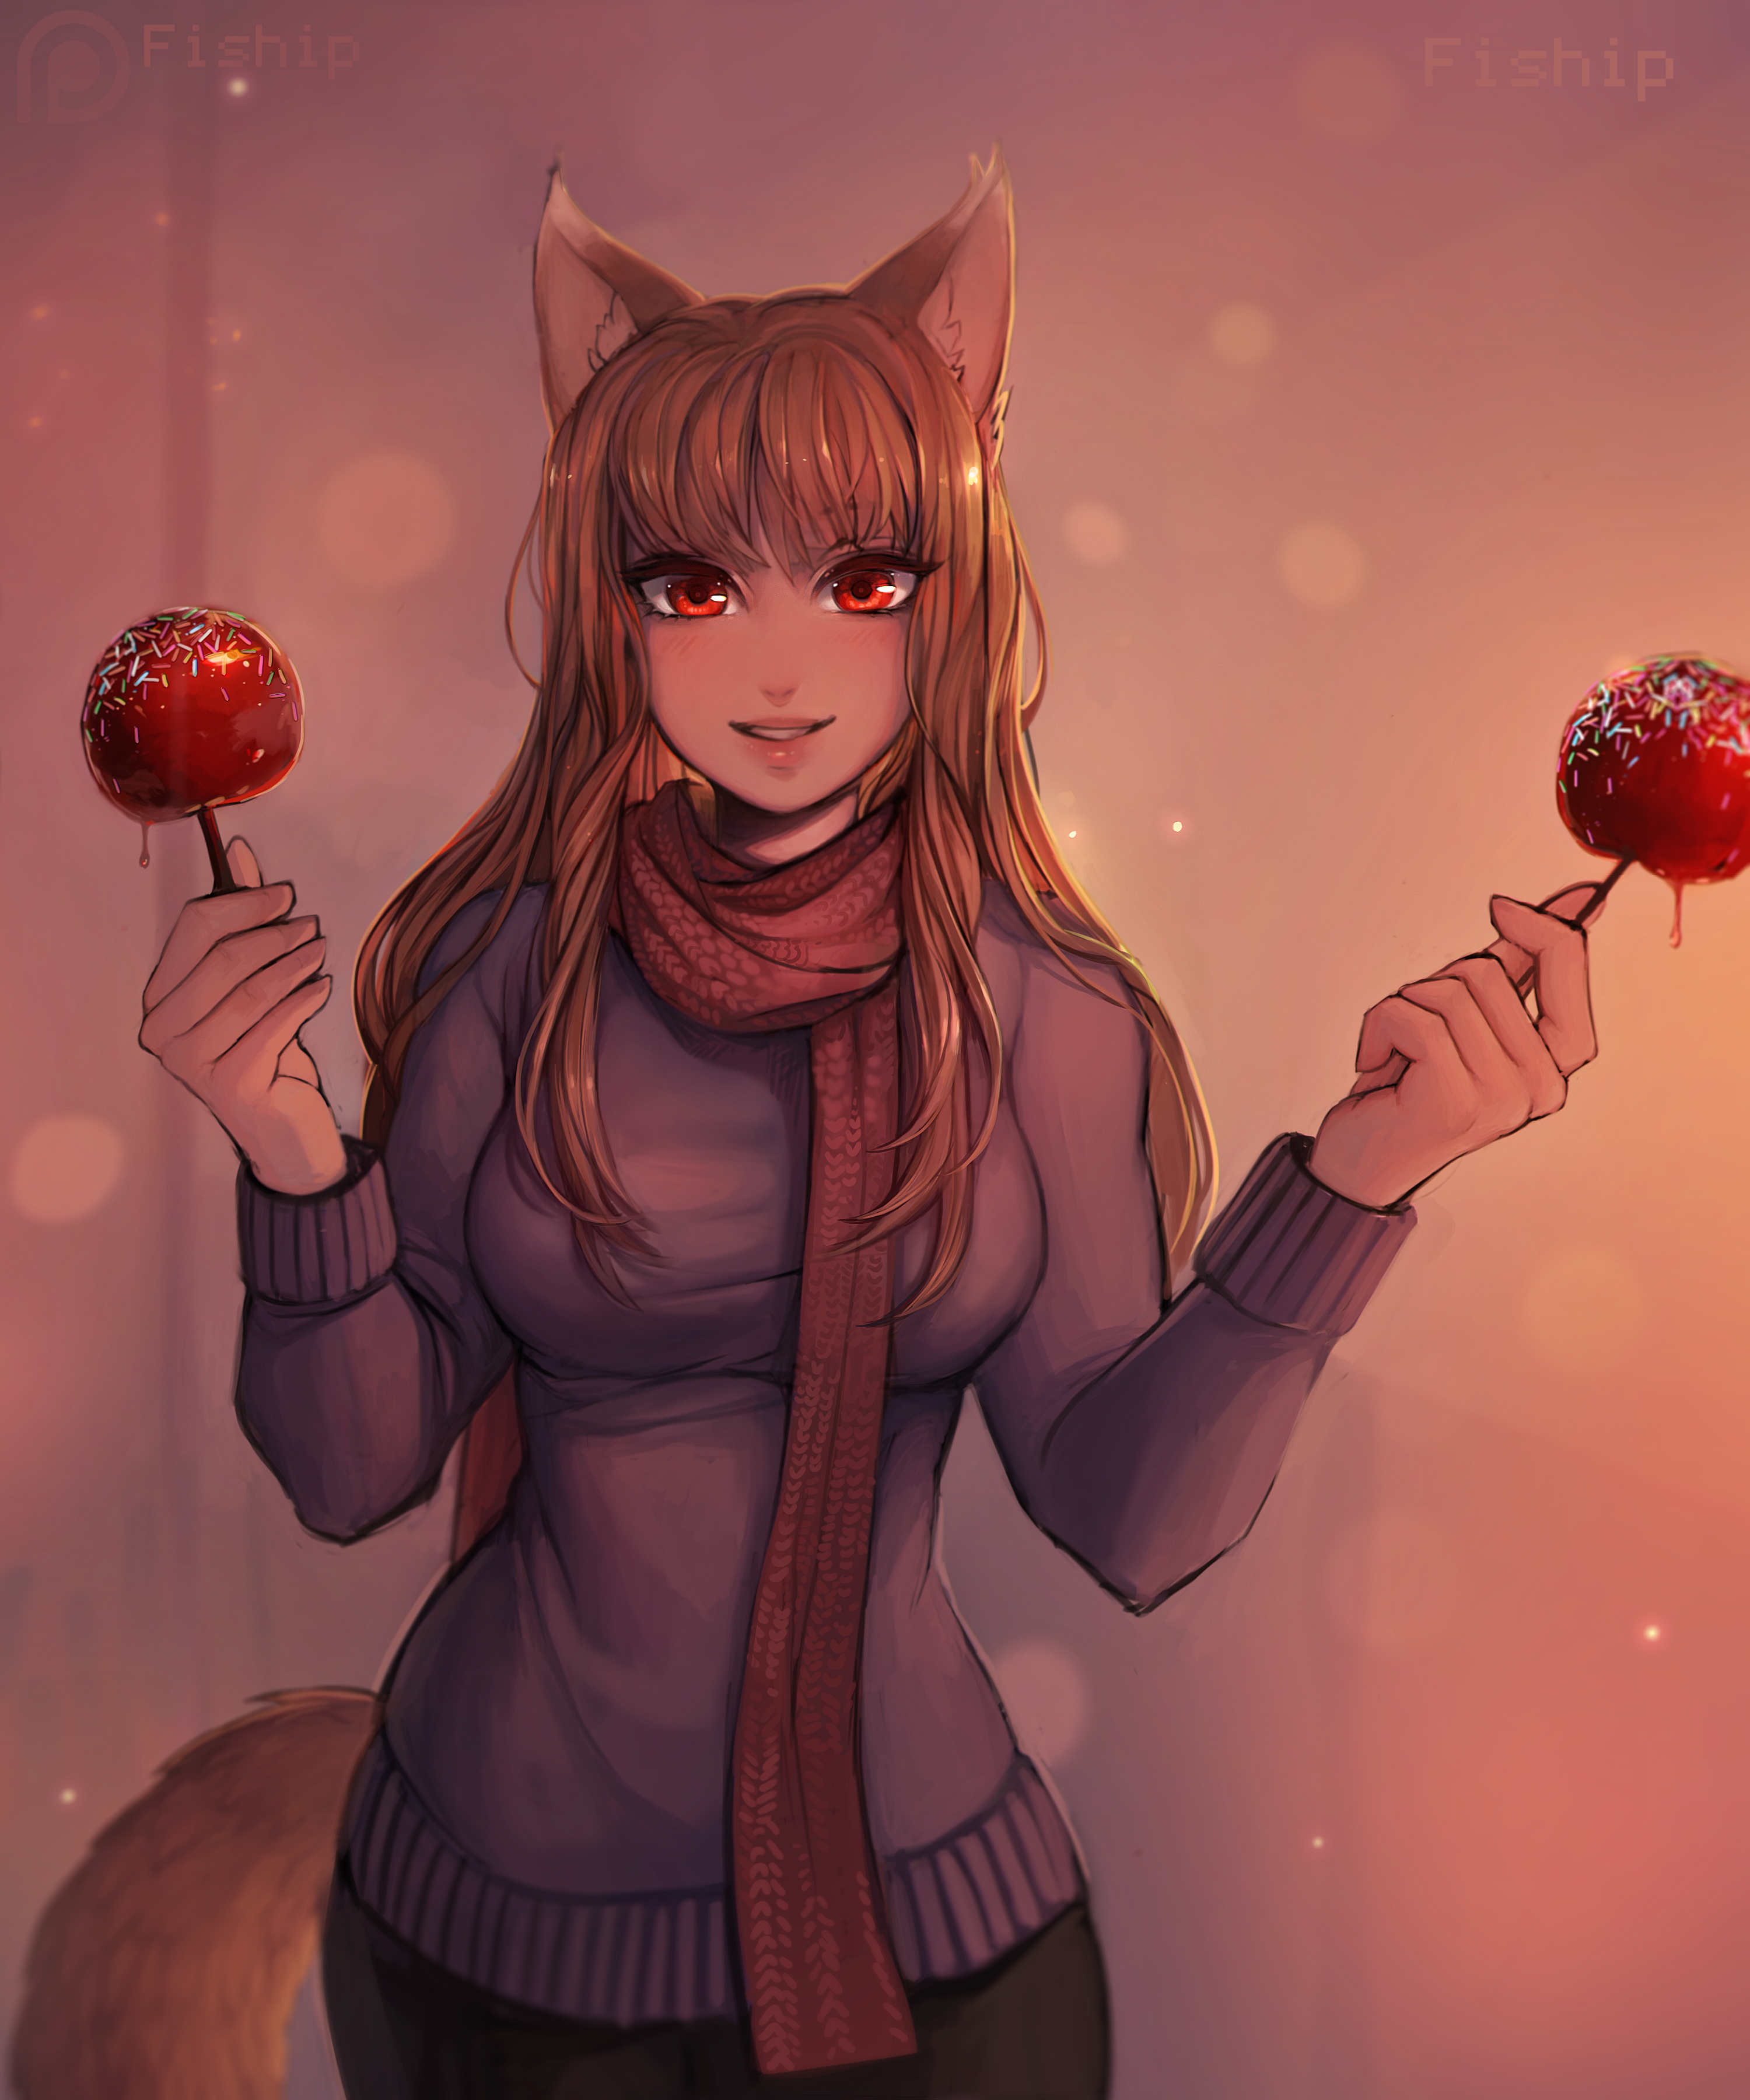 Holo by FISHIP